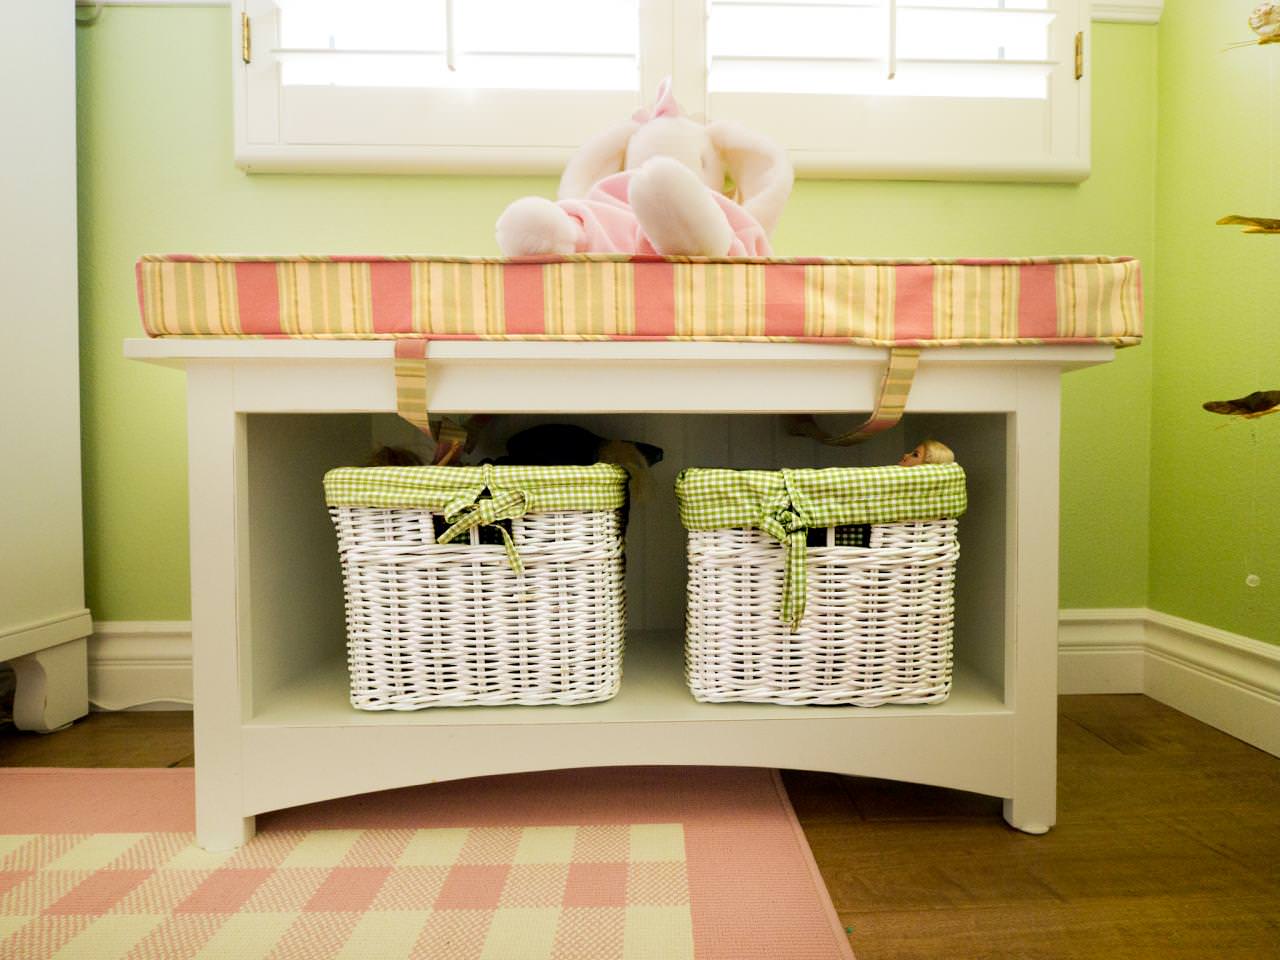 baskets for storing toys in the nursery